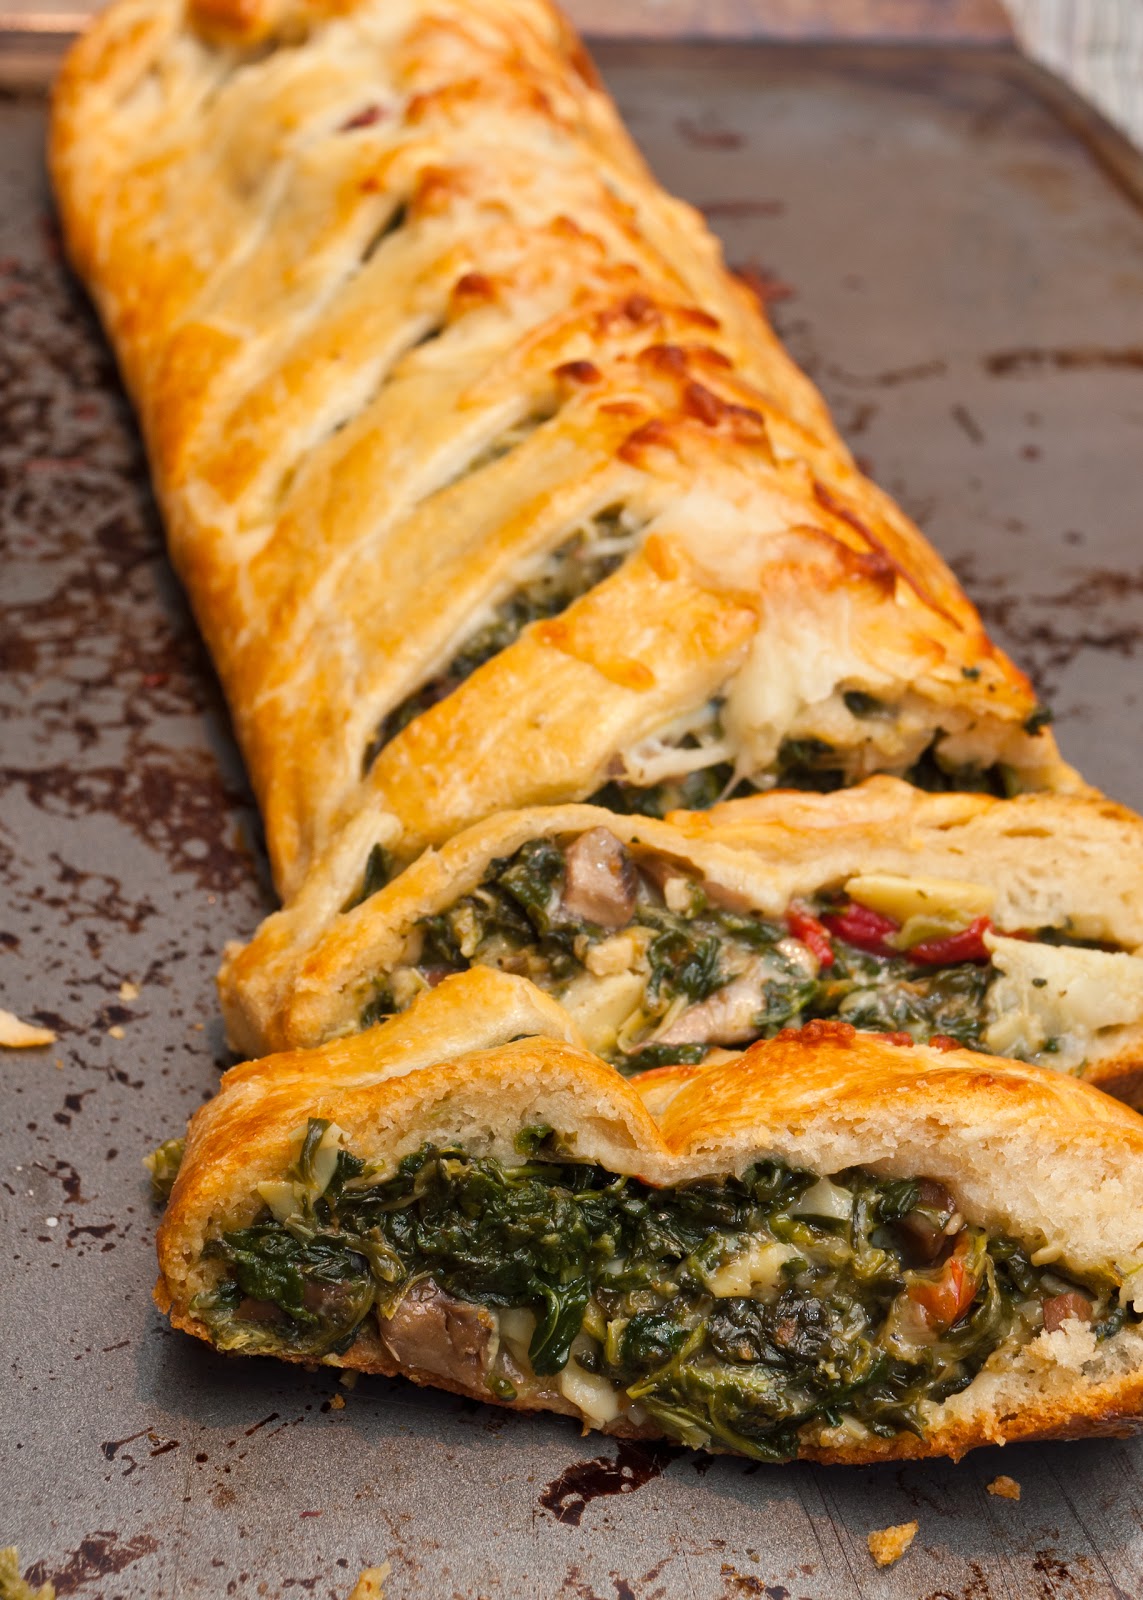 Hedlund Home Cooking: Tuscan Artichoke and Spinach Strudel